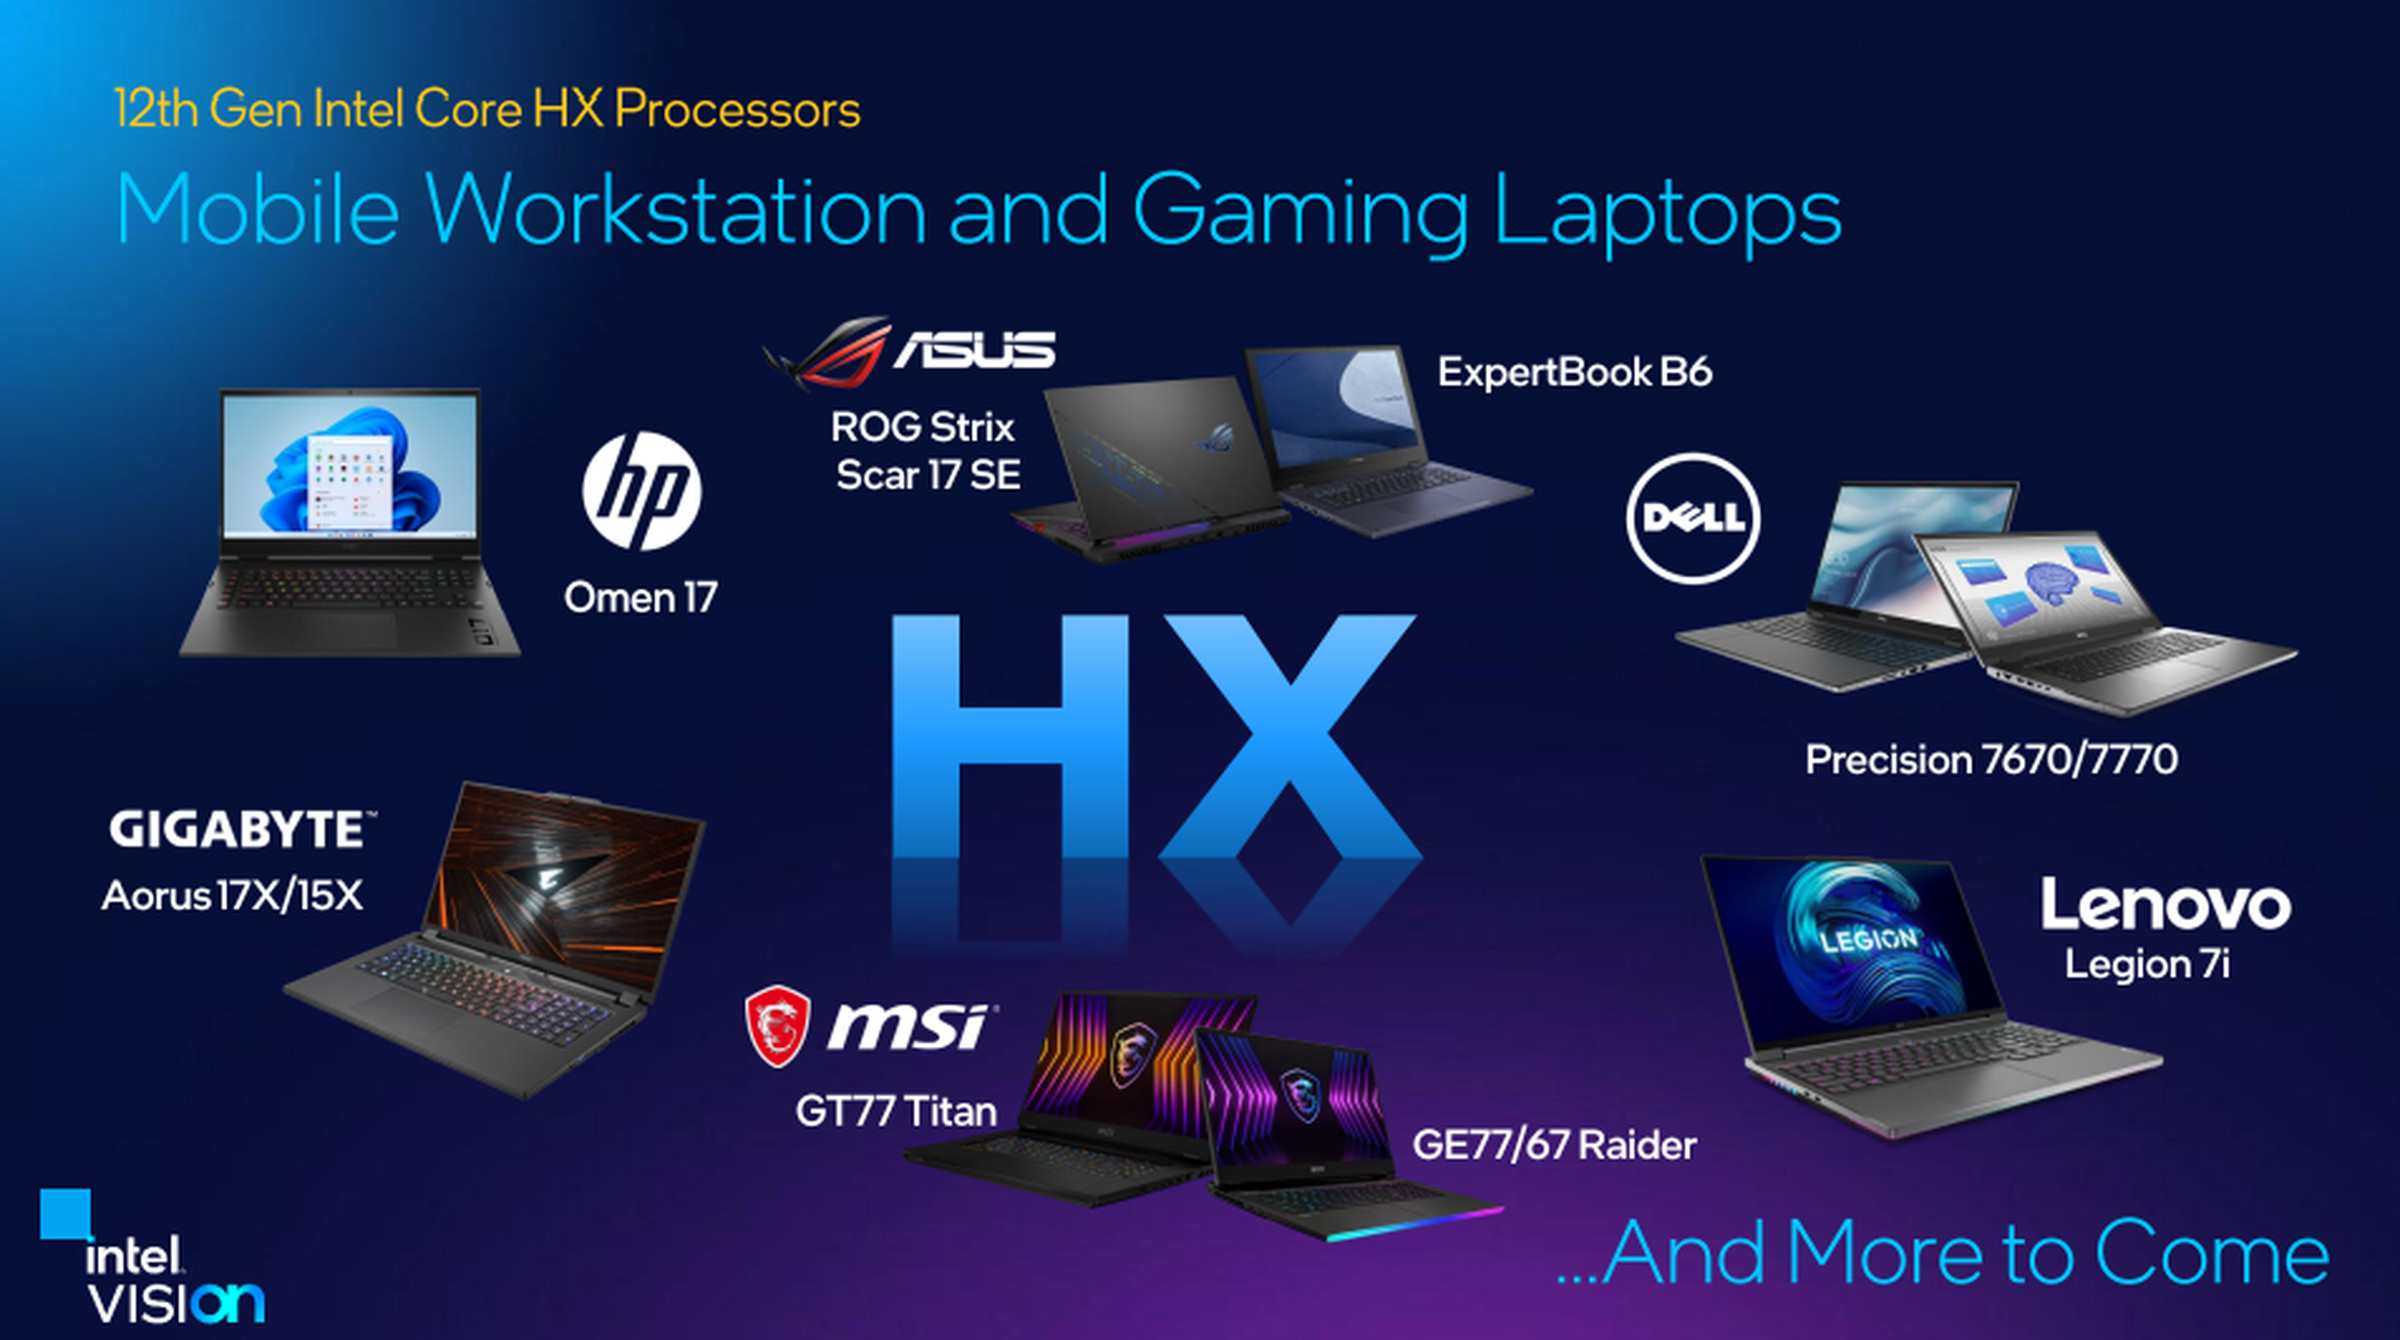 A slide reads “12th Gen Intel Core HX Processors. Mobile Workstation and Gaming laptops”. A circle of laptops surroundes the letters HX labeled HP Omen 17, Gigabyte Aero 17X, MSI GS77 Titan, GE76 Raider, Lenovo Legion 7i, Precision 7670/7770, ExpertBook B6, and ROG Strix Scare 17 SE. The bottom reads “And more to come.”